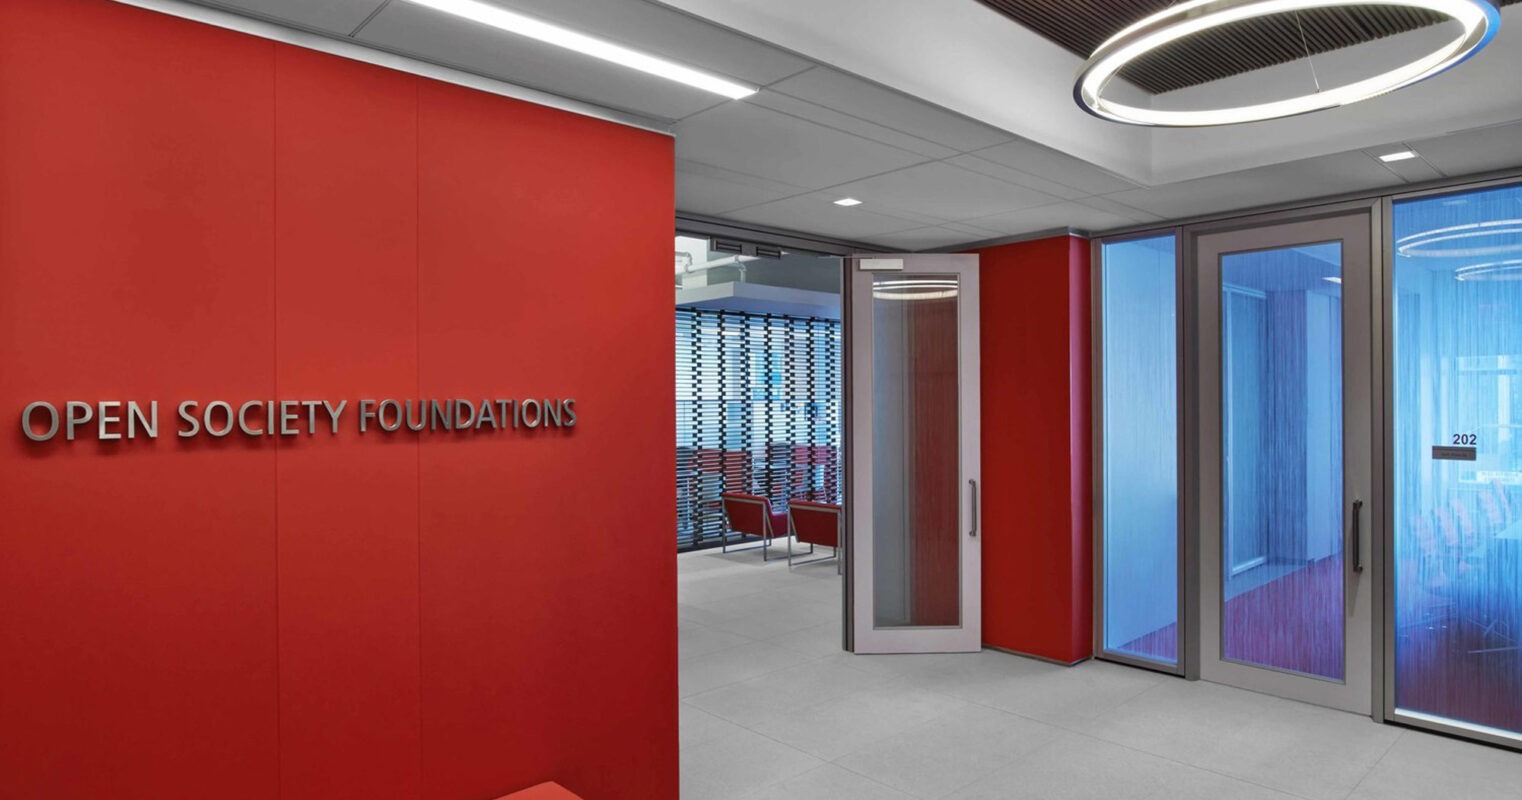 Modern office corridor featuring a vibrant red wall with the text 'OPEN SOCIETY FOUNDATIONS', complemented by a sleek red bench. The space is defined by contemporary lighting fixtures and two-toned flooring, leading to a glass door marked '202'.